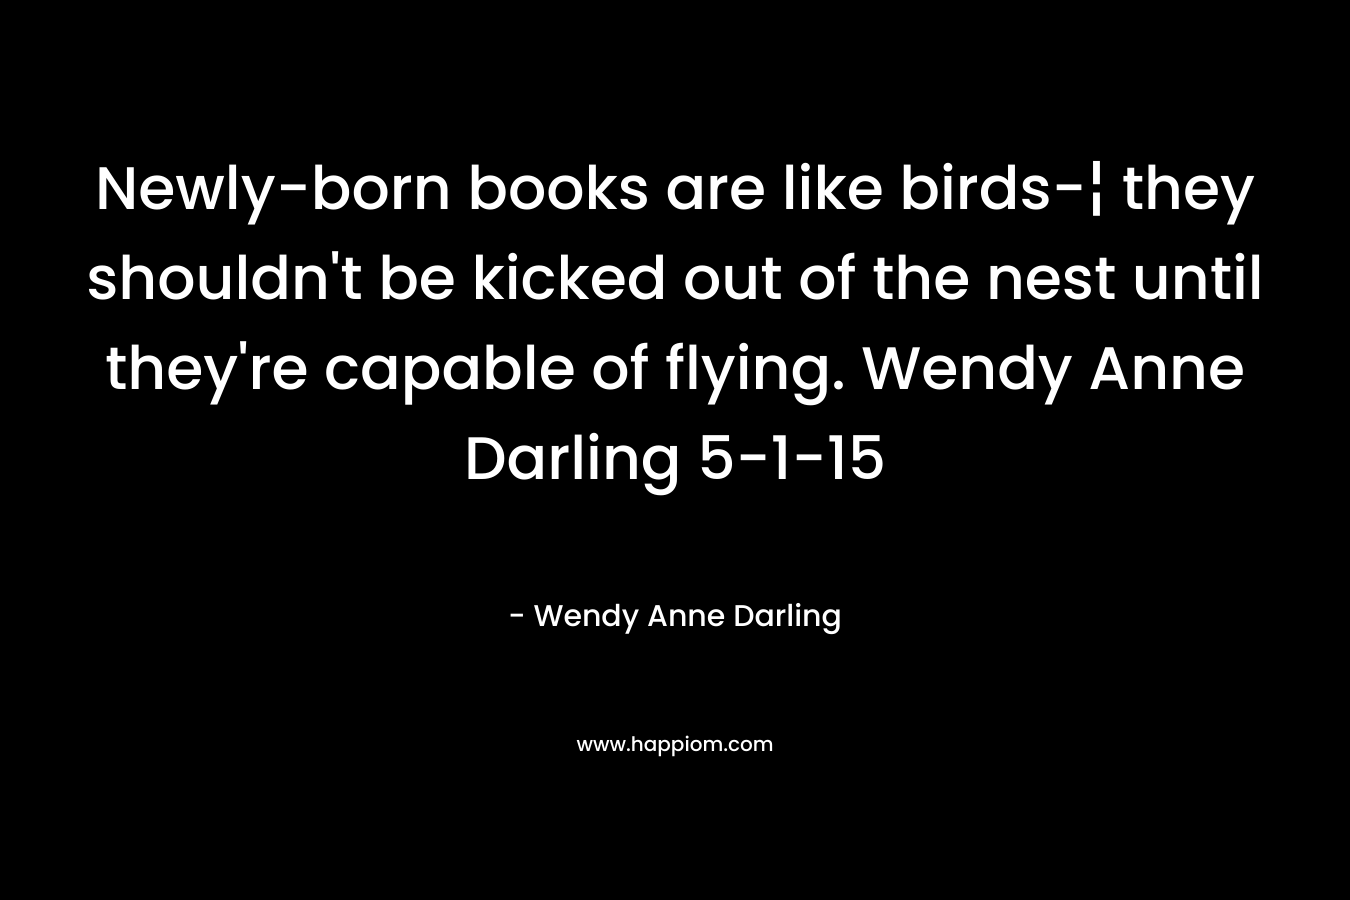 Newly-born books are like birds-¦ they shouldn't be kicked out of the nest until they're capable of flying. Wendy Anne Darling 5-1-15